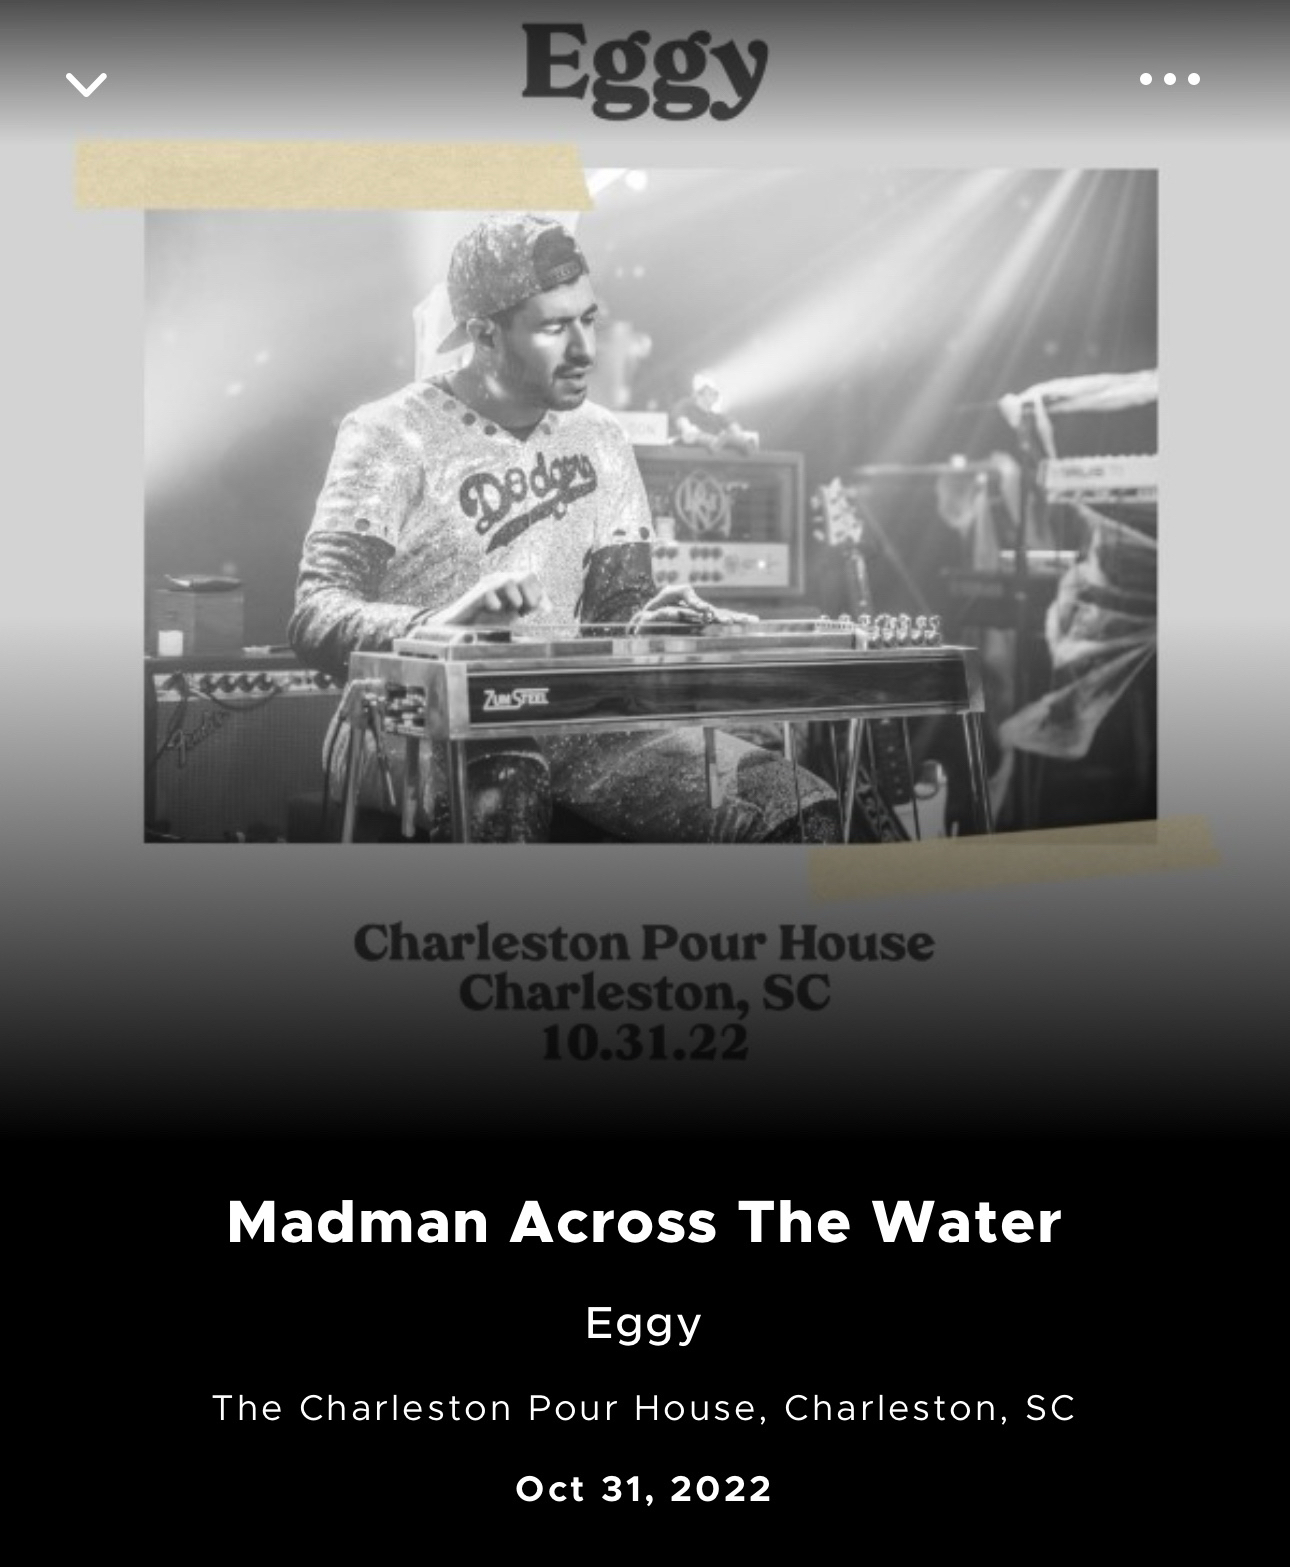 #Eggy -  Oct 31, 2022 - Madman Across The Water - The Charleston Pour House, Charleston, SC